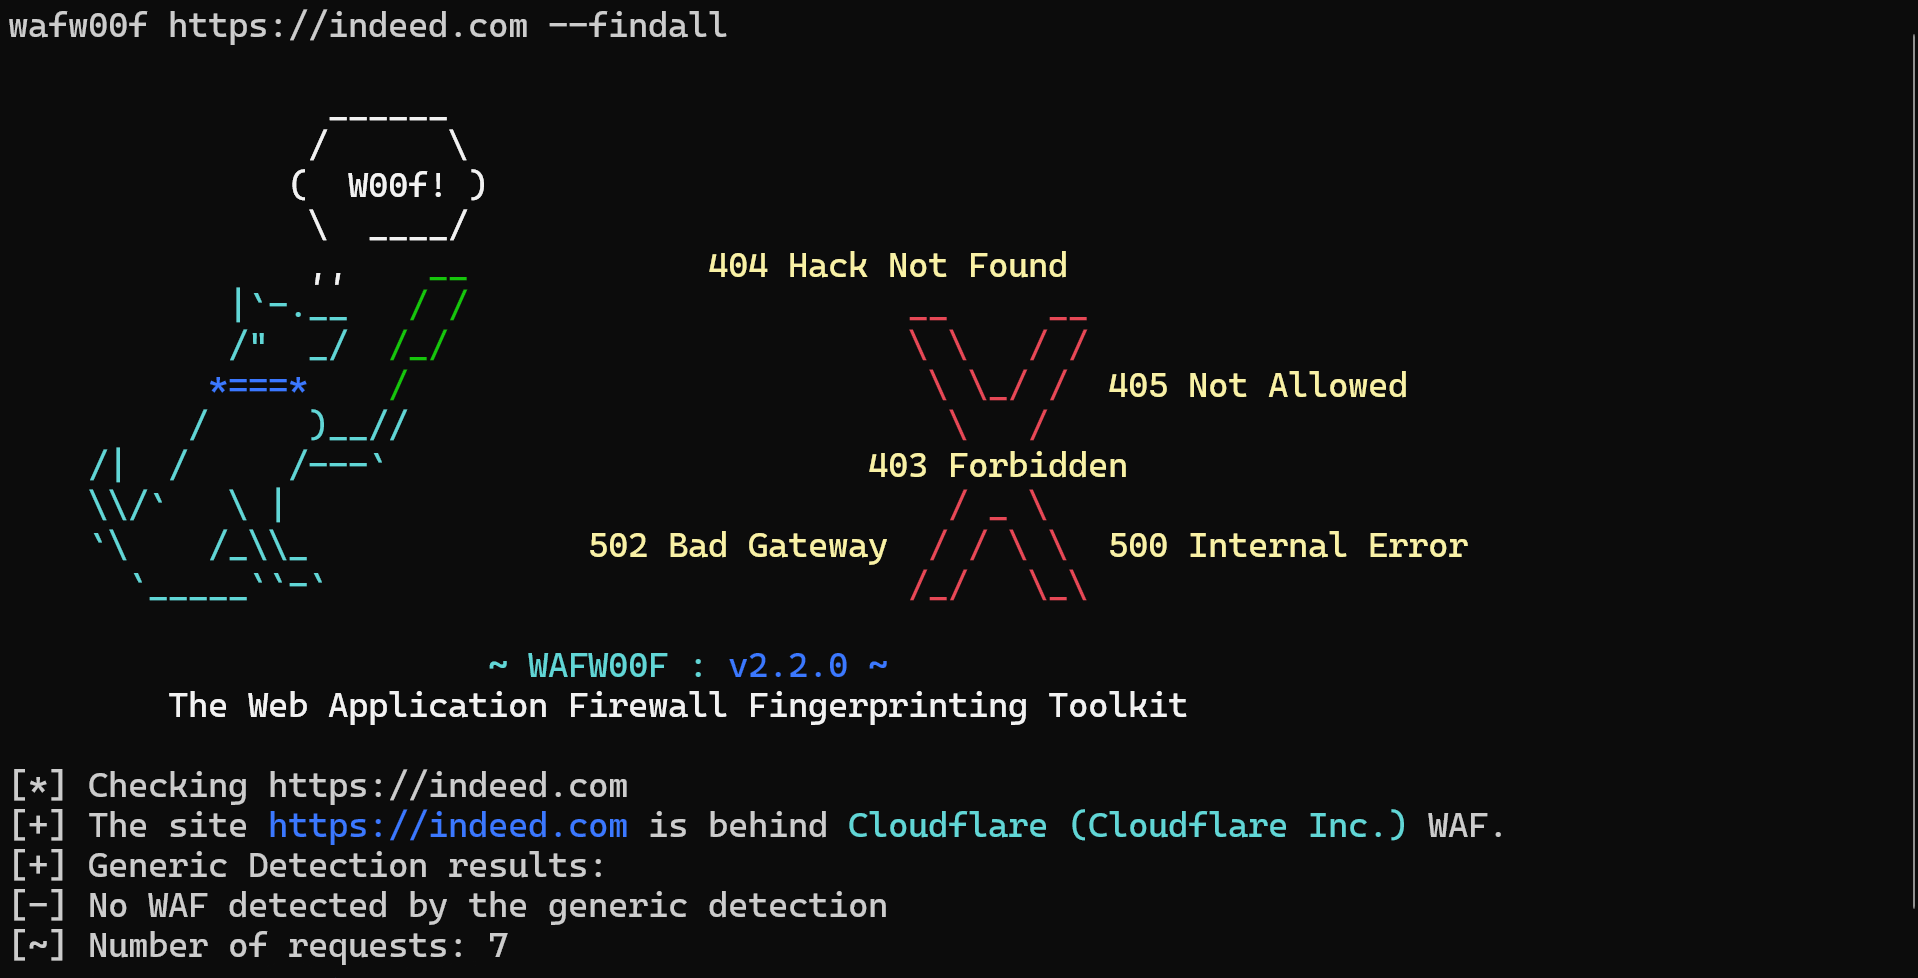 wafw00f indeed antibot identification results